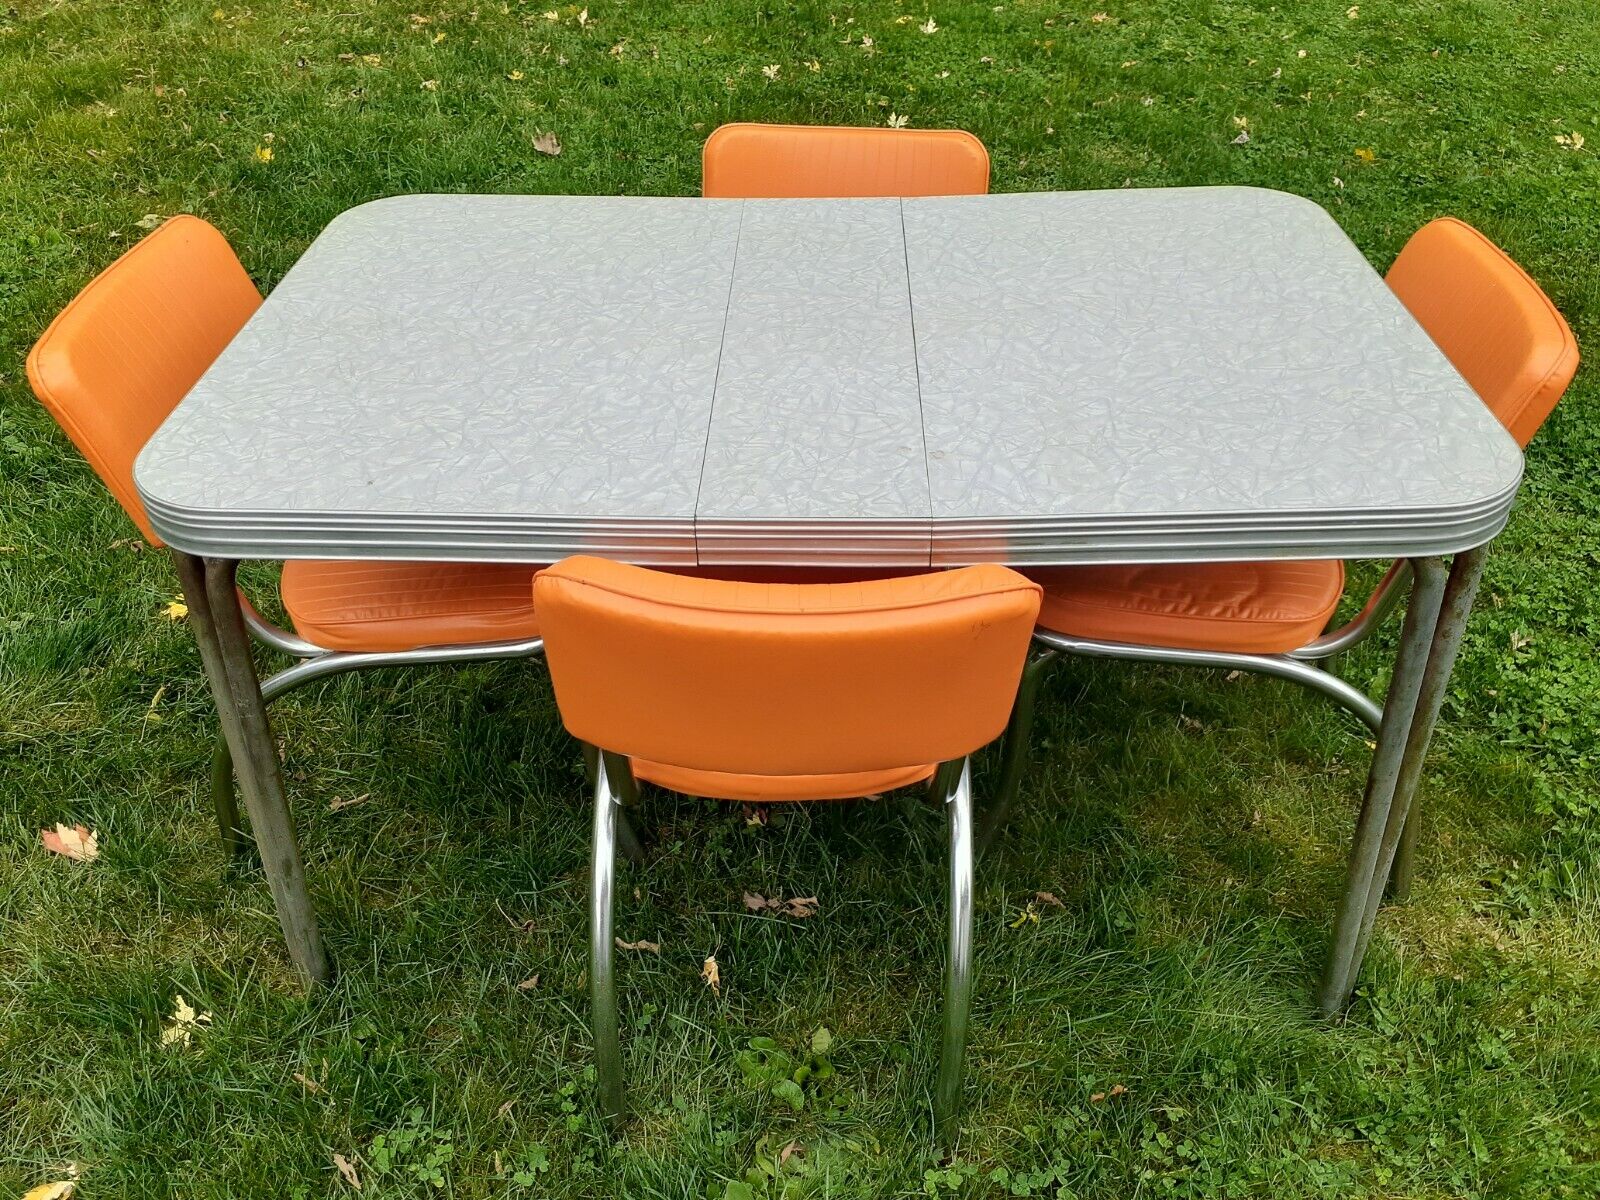 VINTAGE 50s-60s FORMICA & CHROME KITCHEN TABLE WITH LEAF & 4 ORANGE CHAIRS Без бренда